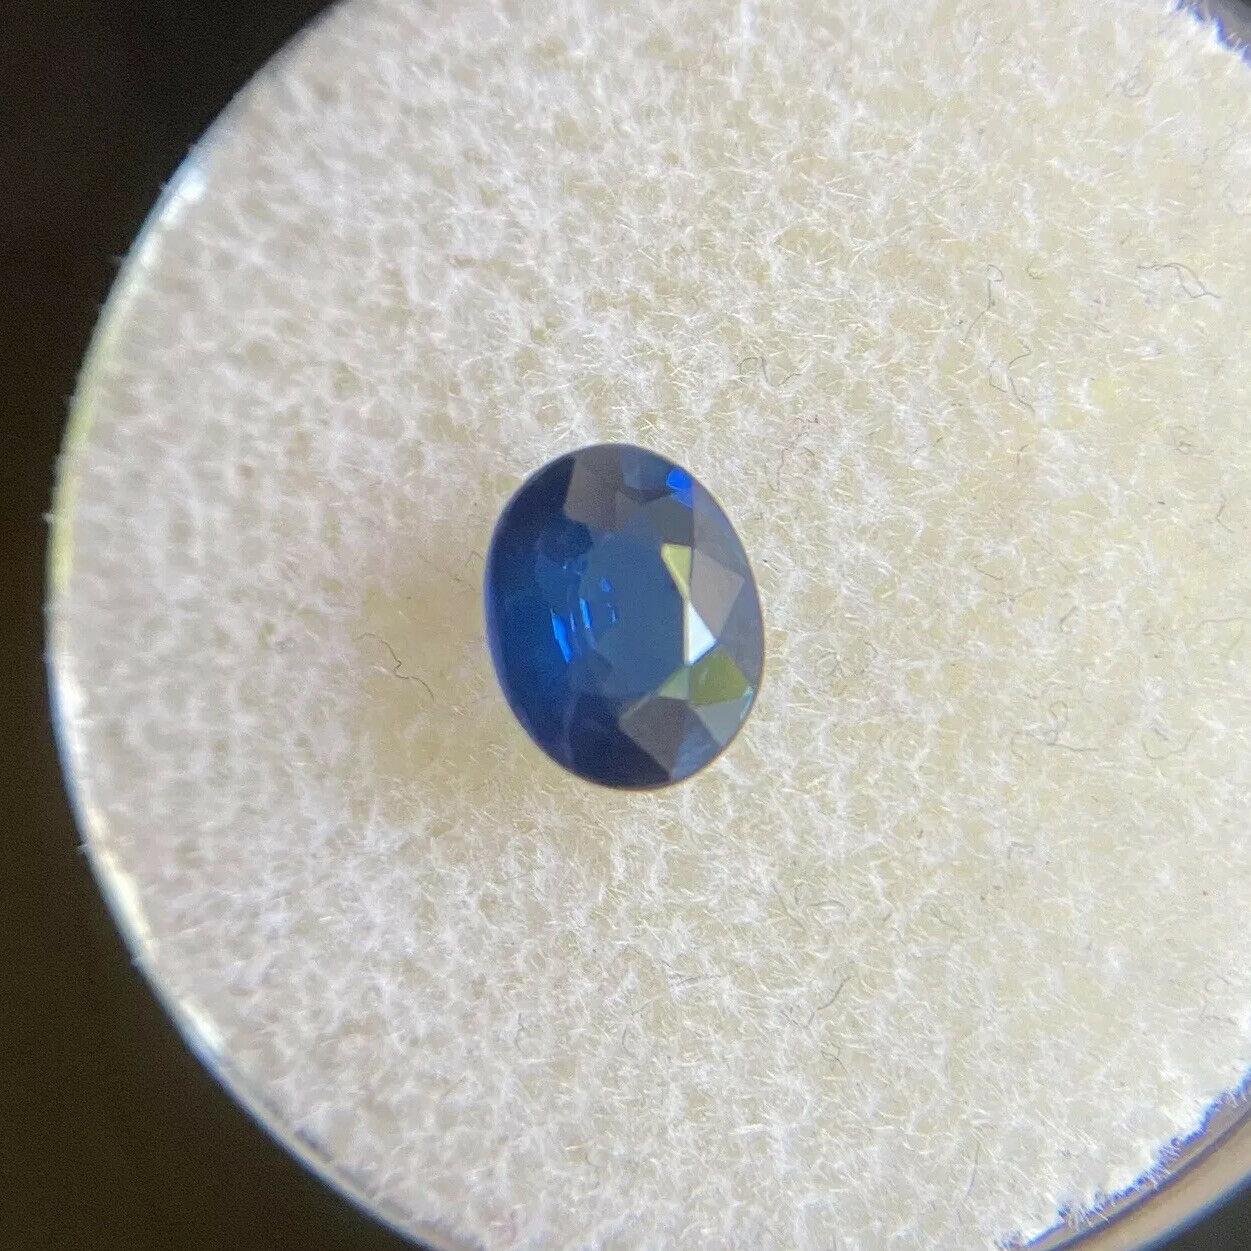 Natural Royal Blue Sapphire 0.90ct Oval Cut Thailand Loose Gemstone 6.6 x 5.2mm

Natural Sapphire with beautiful deep royal blue colour. 
Mined in Thailand, rare source for sapphires. 
0.90 carat stone with very good clarity, very clean stone. 
A